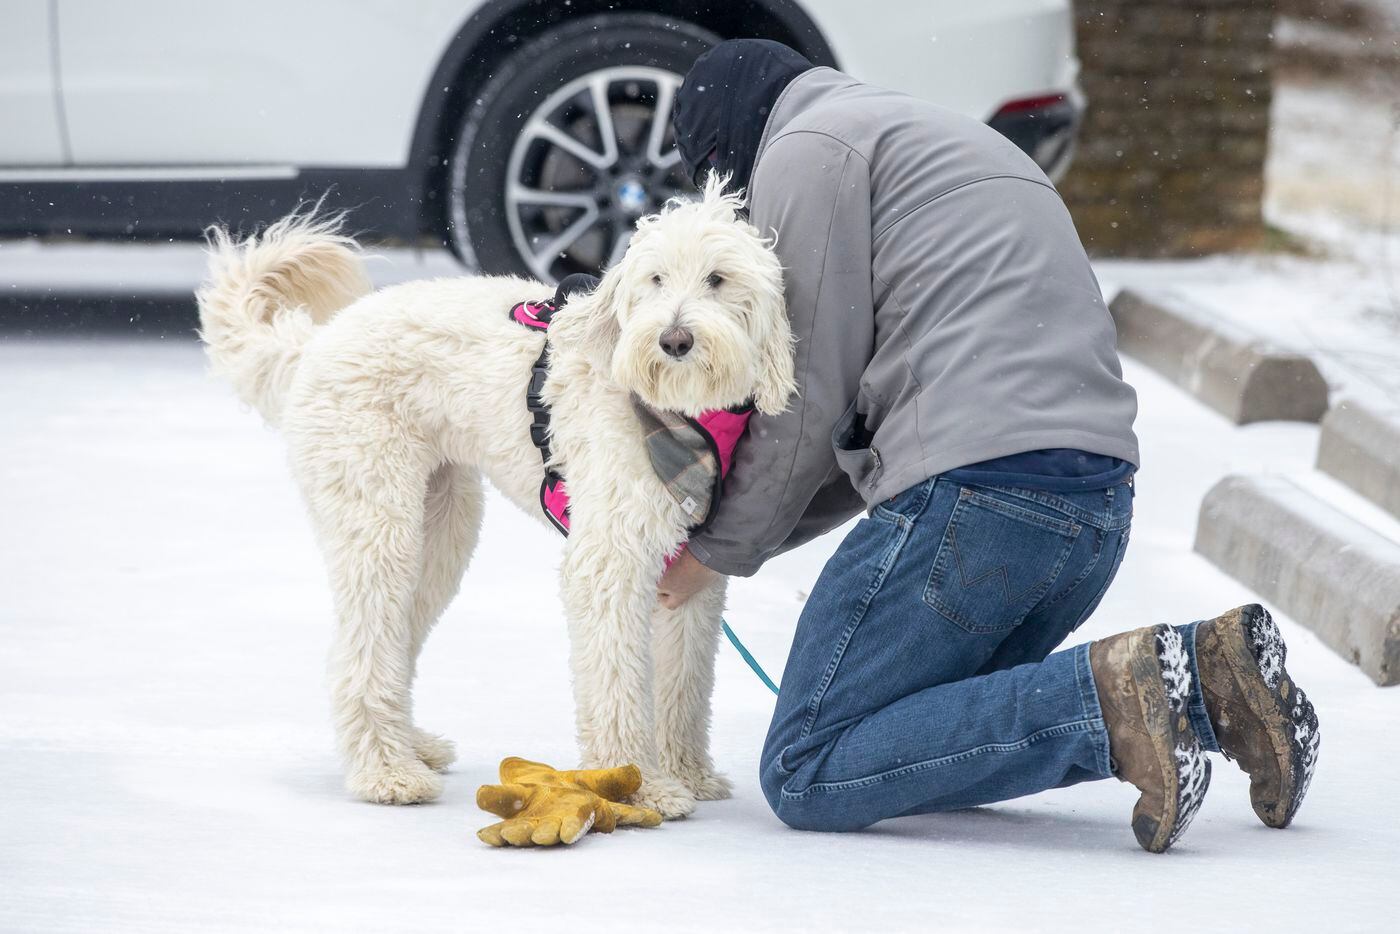 Dustin McBlain gets his dog, Ellie, ready for a walk in the snow at Flag Pole Hill Park on Sunday, Feb. 14, 2021, in Dallas. The region is currently under a winter storm warning. (Lynda M. González/The Dallas Morning News)